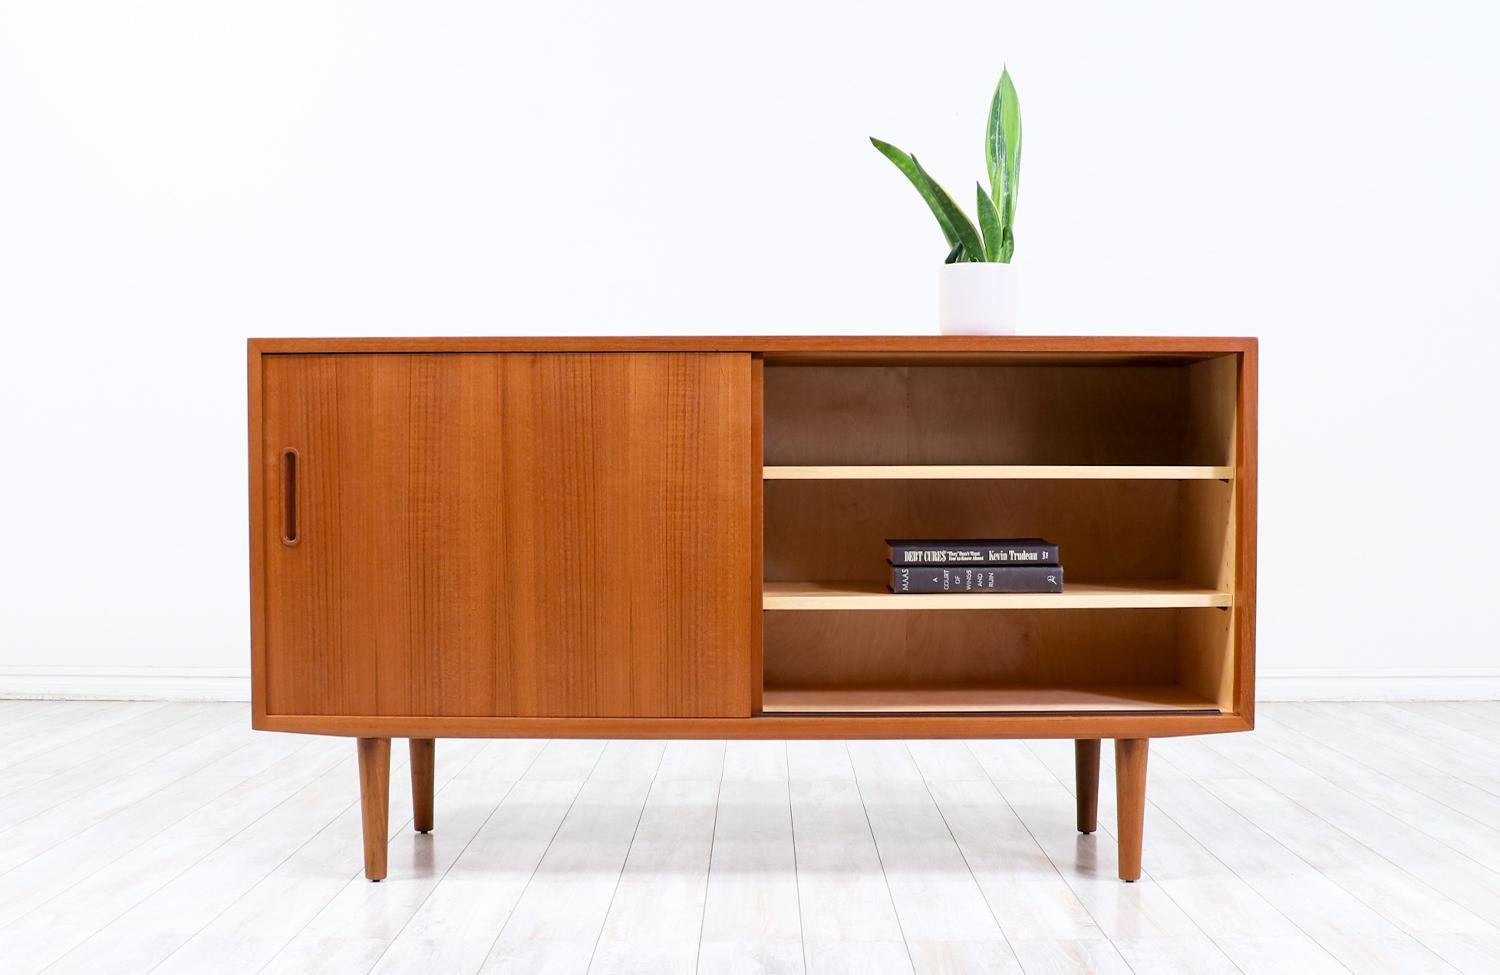  Expertly Restored - Danish Modern Teak Credenza by Carlo Jensen for Hundevad In Excellent Condition For Sale In Los Angeles, CA